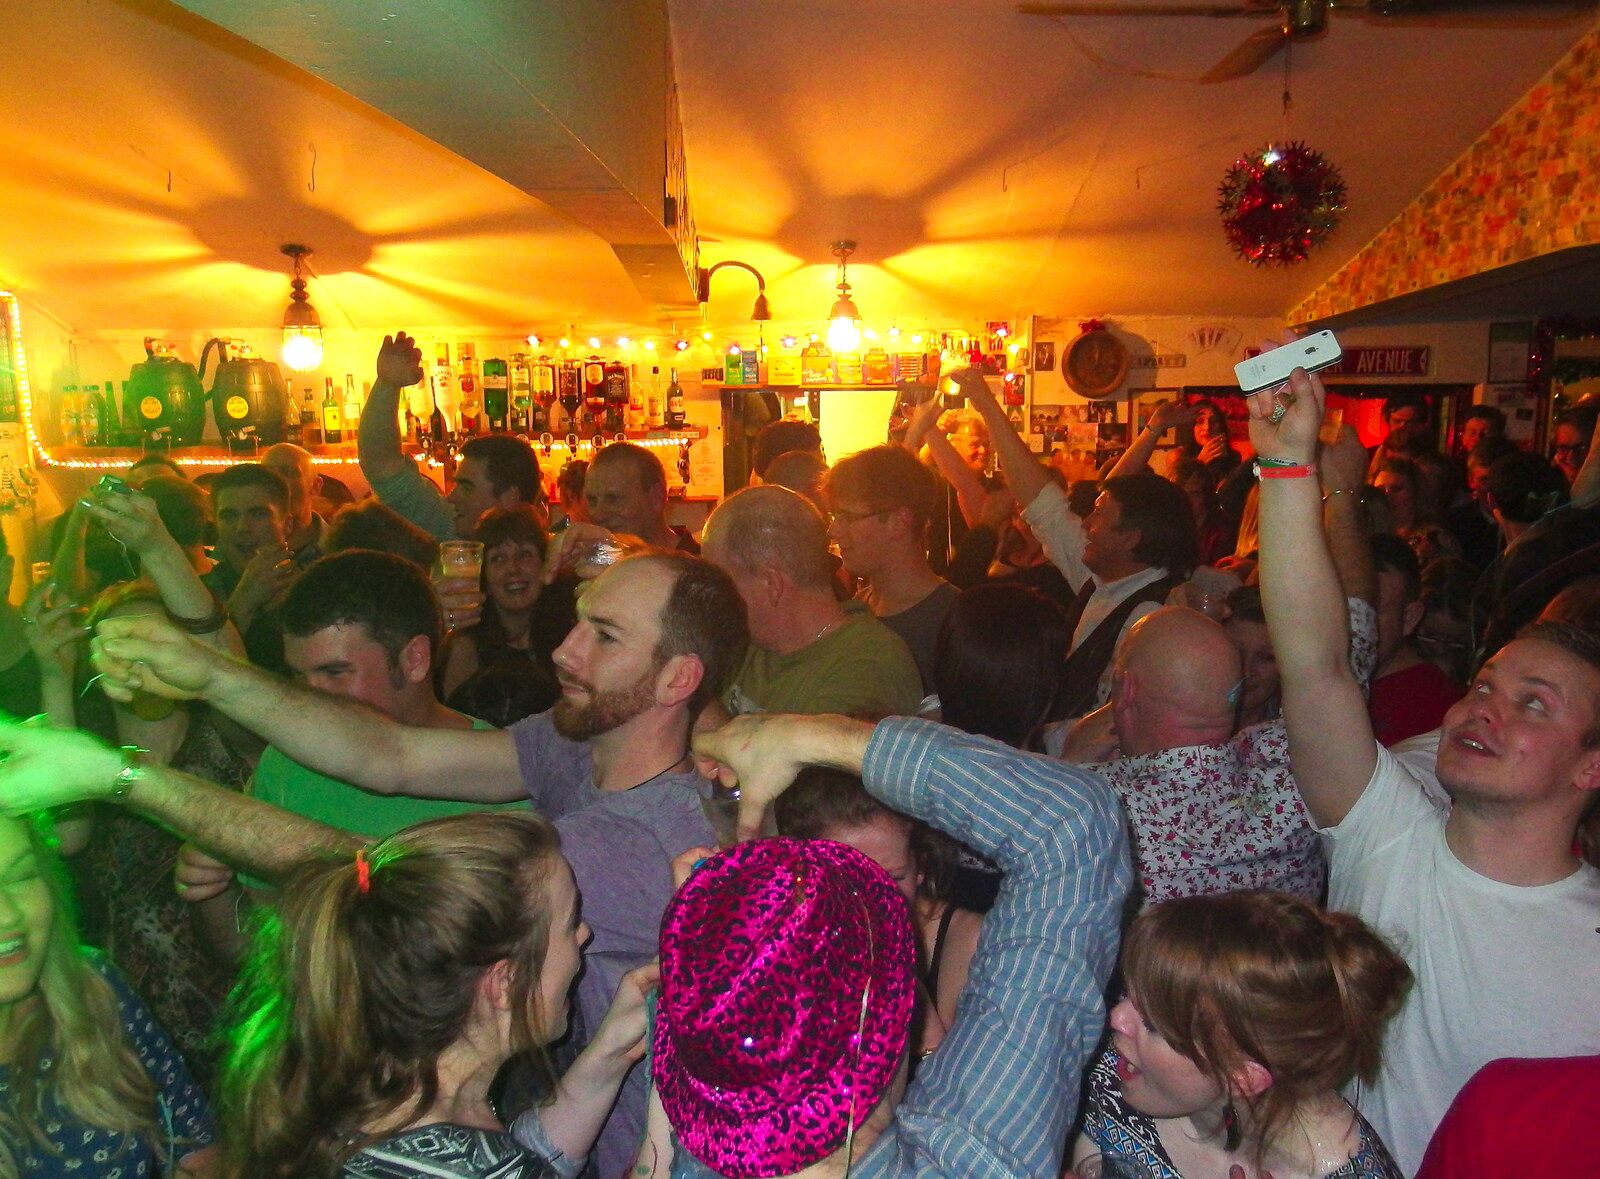 Packed party crowd from The BBs Do New Year's Eve at the Barrel, Banham, Norfolk - 31st December 2013